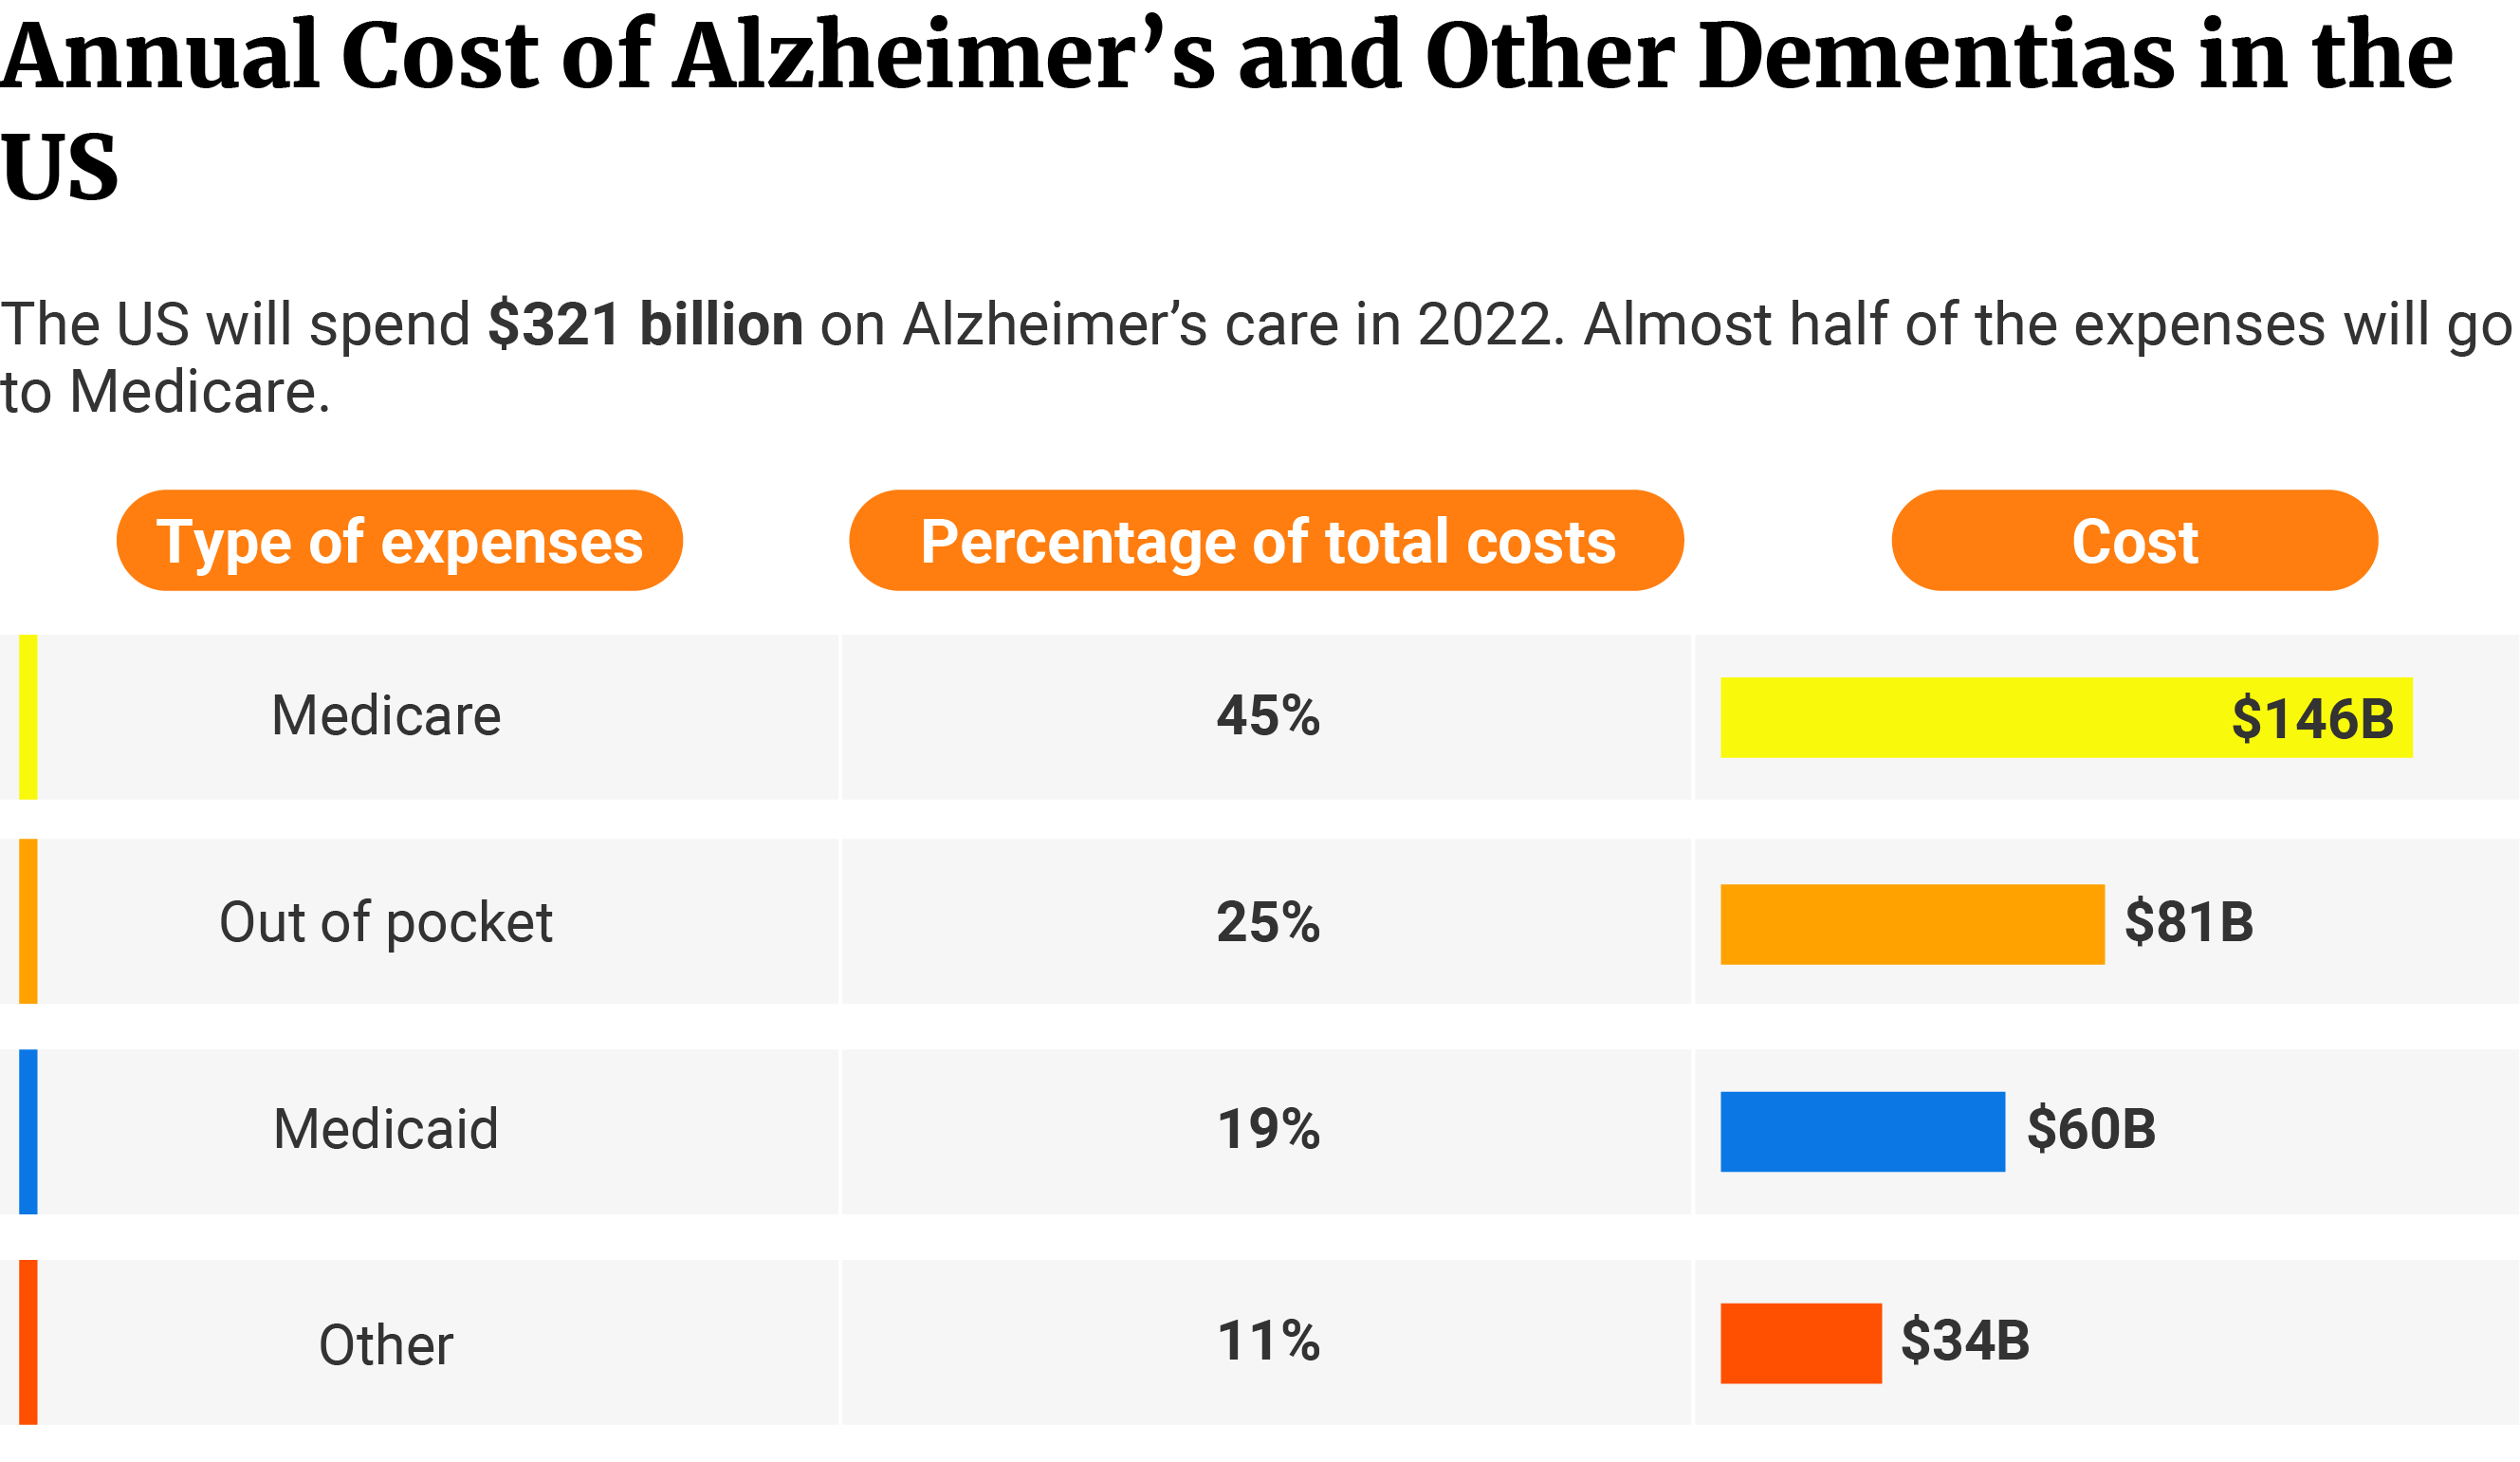 Table showing 45% of Alzheimer’s cost went to Medicare with $146 billion, 25% to out-of-pocket expenses with $81 billion, 19% to Medicaid with $60 billion, and 11% to other expenses with $34 billion.